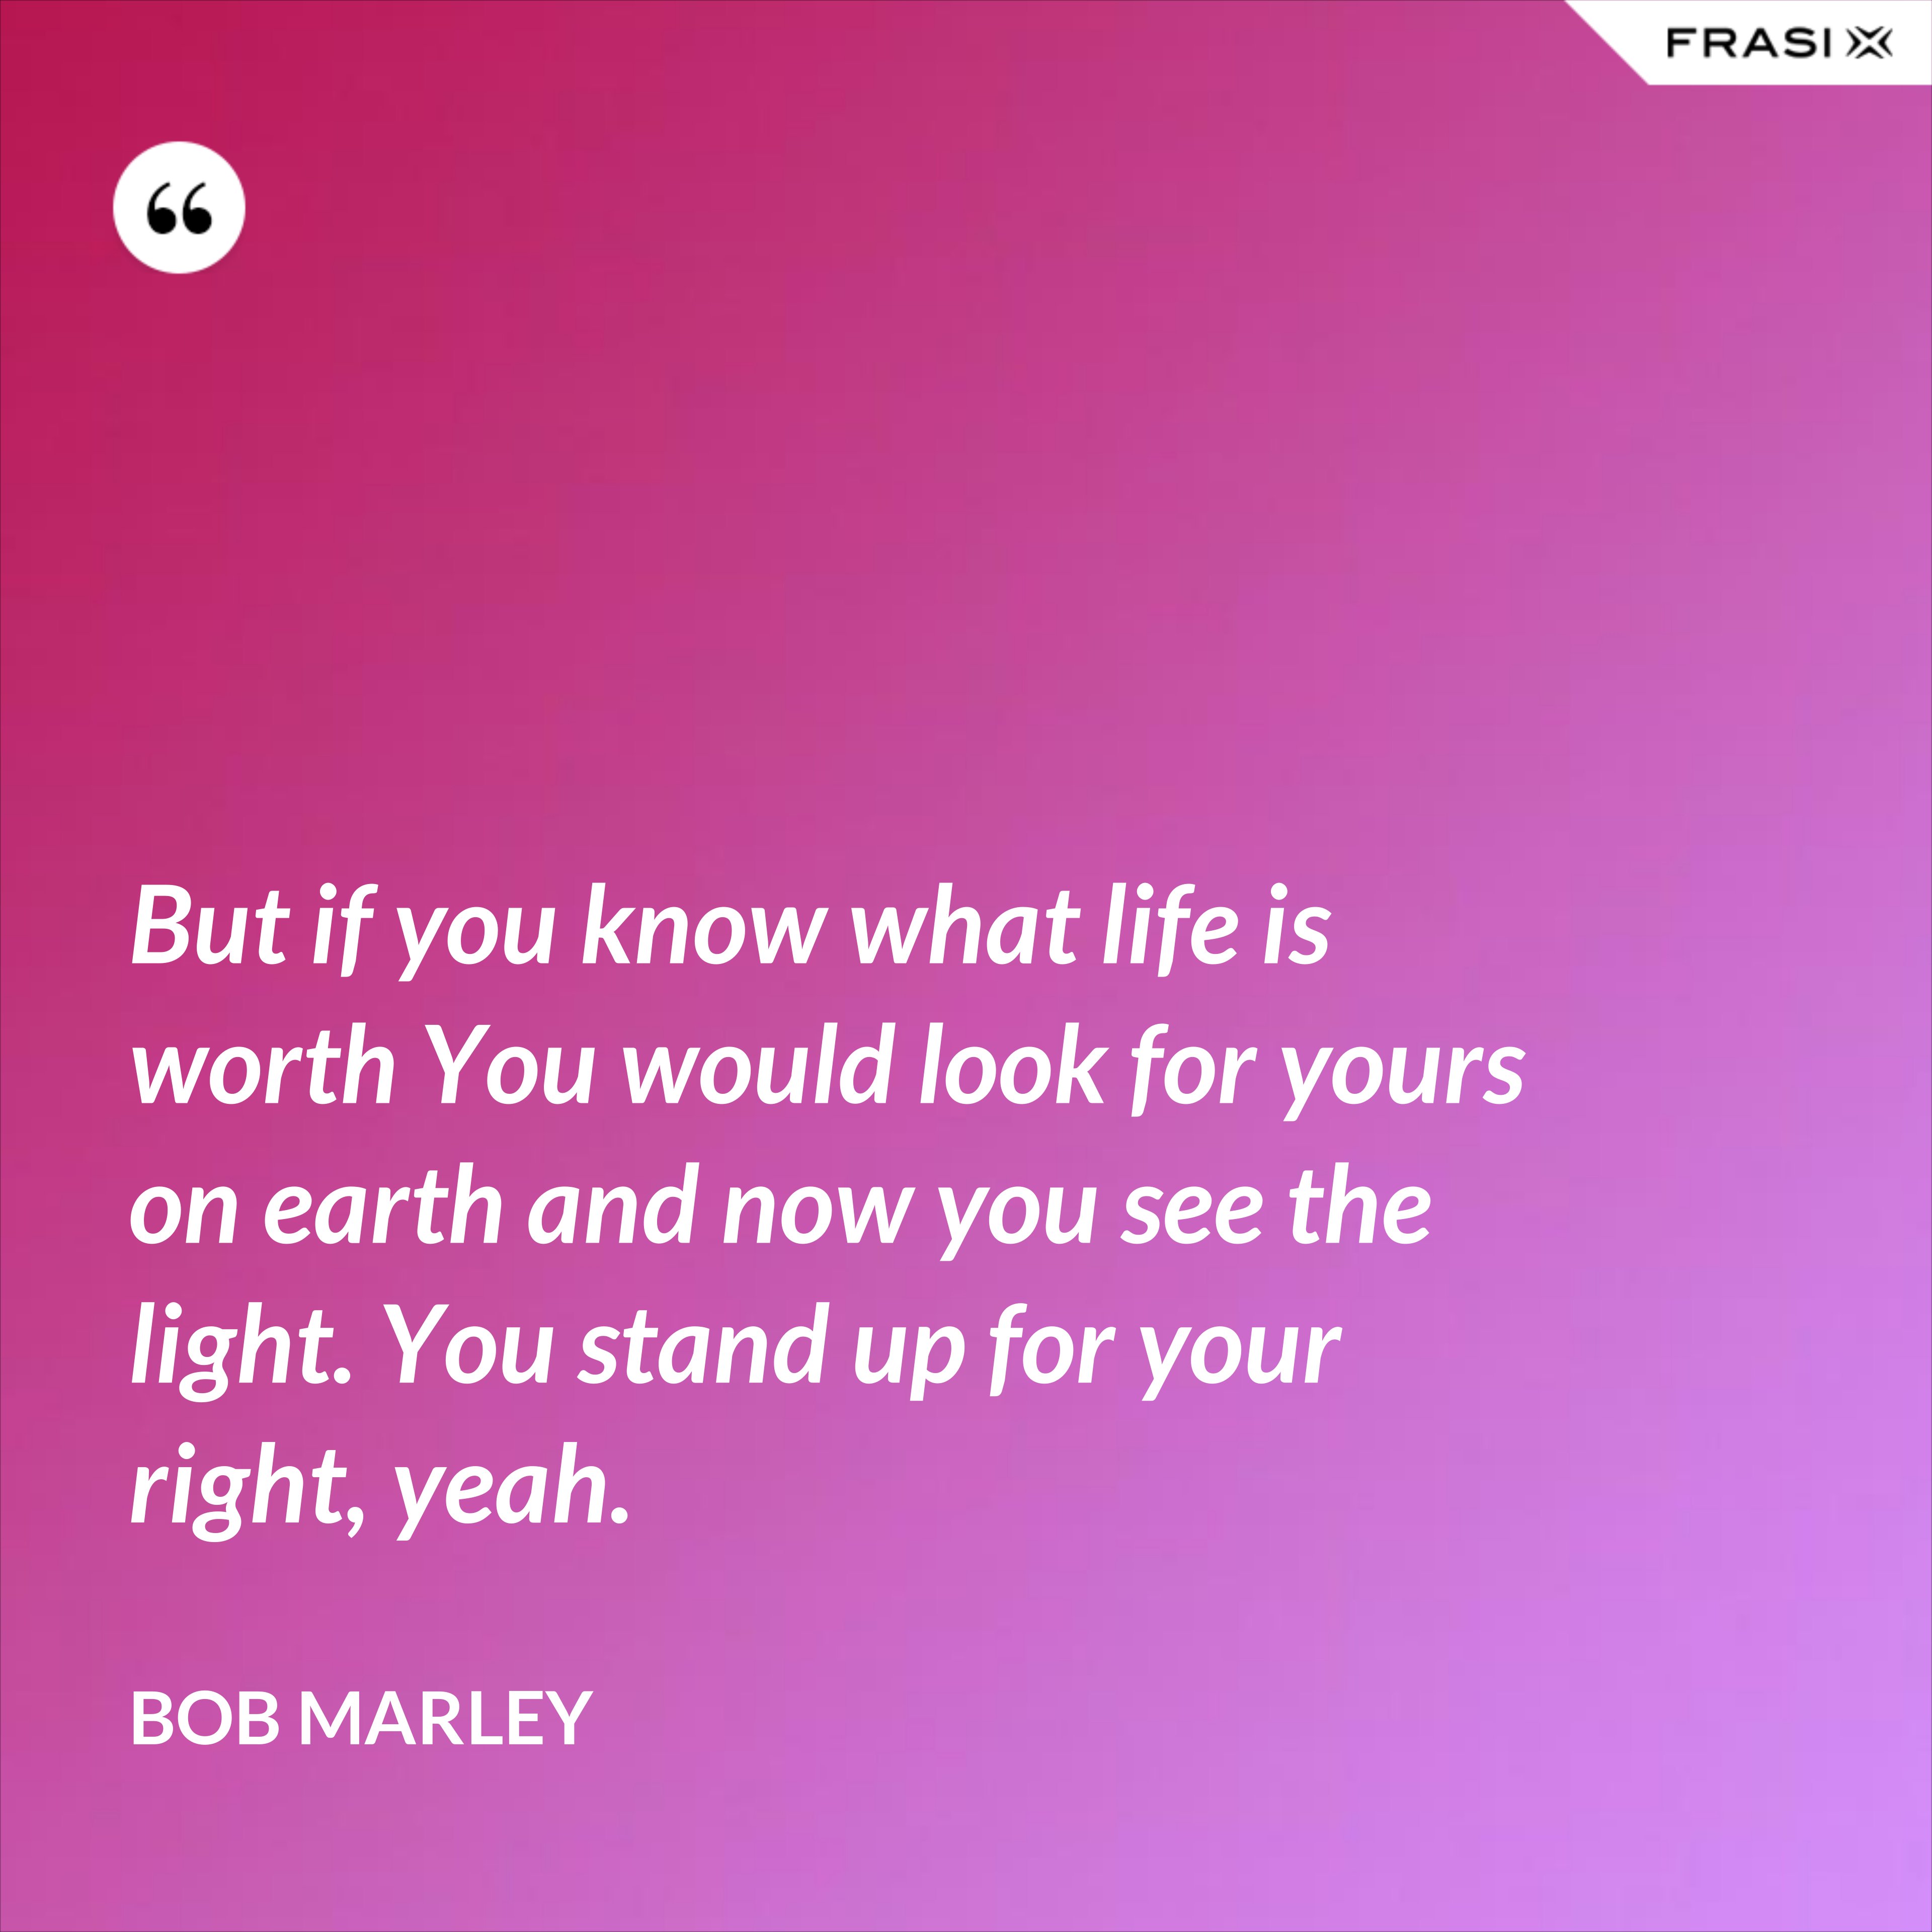 But if you know what life is worth You would look for yours on earth and now you see the light. You stand up for your right, yeah. - Bob Marley